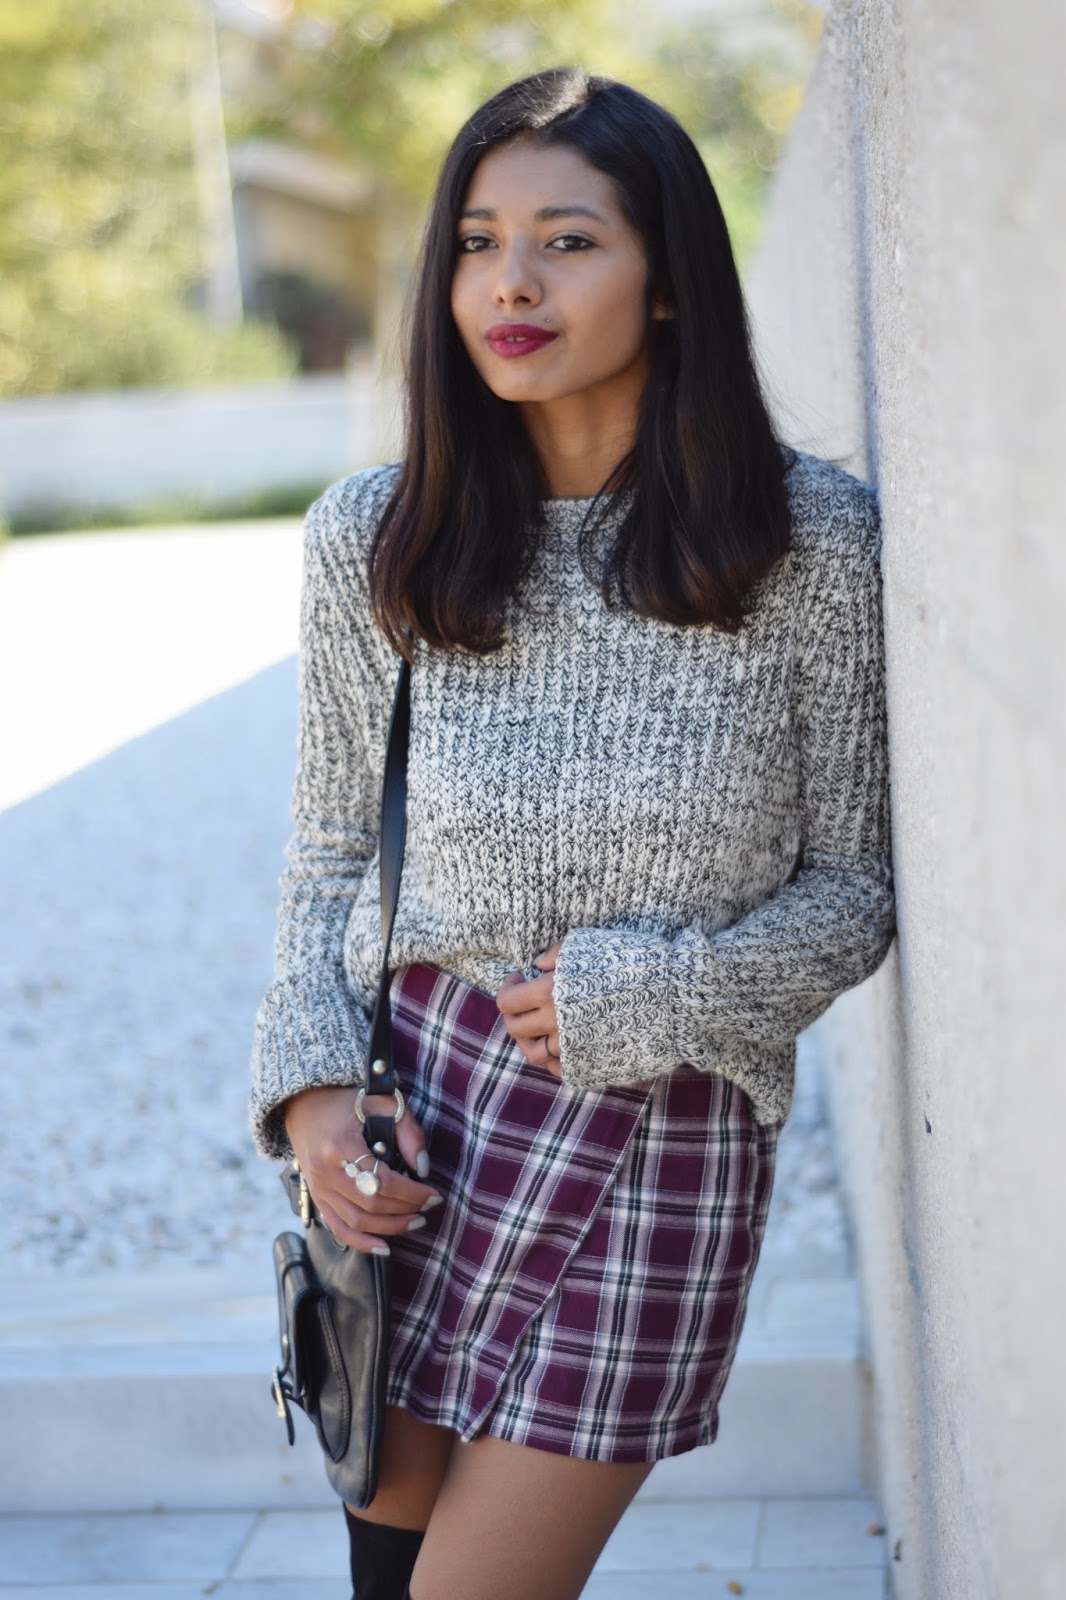 THIGH BOOTS AND PLAID SHORTS - K Meets Style